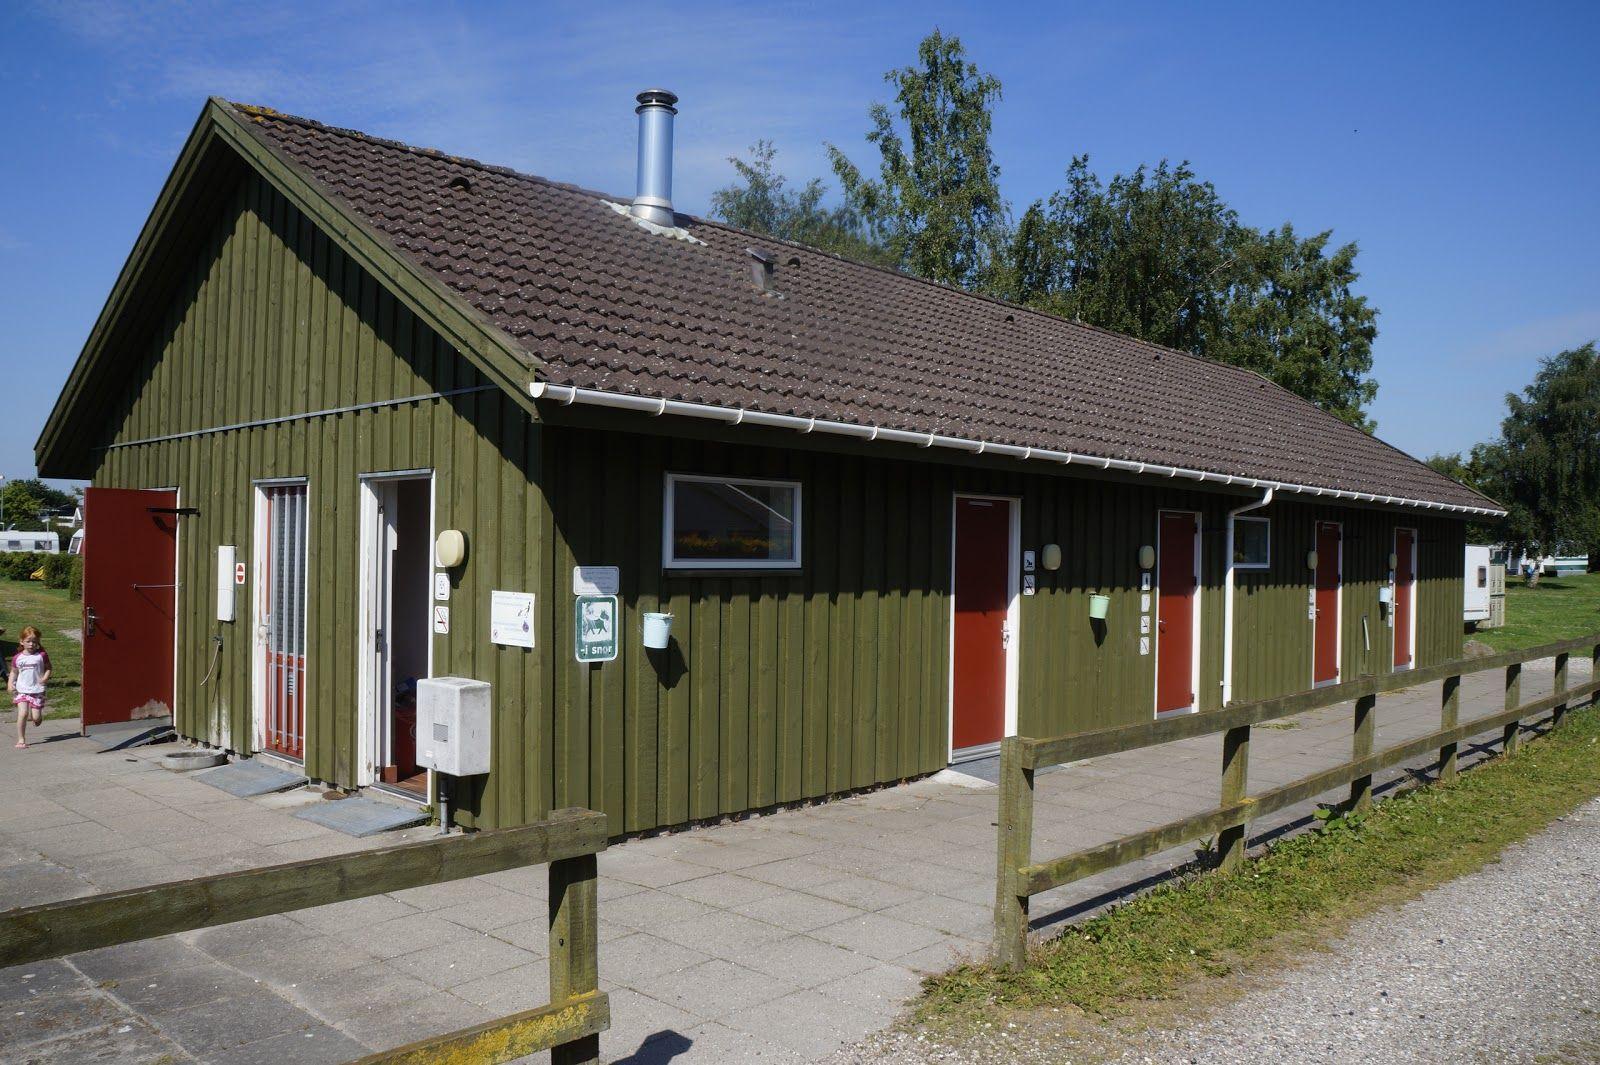 Faxe Ladeplads Camping, Faxe Ladeplads, Denmark